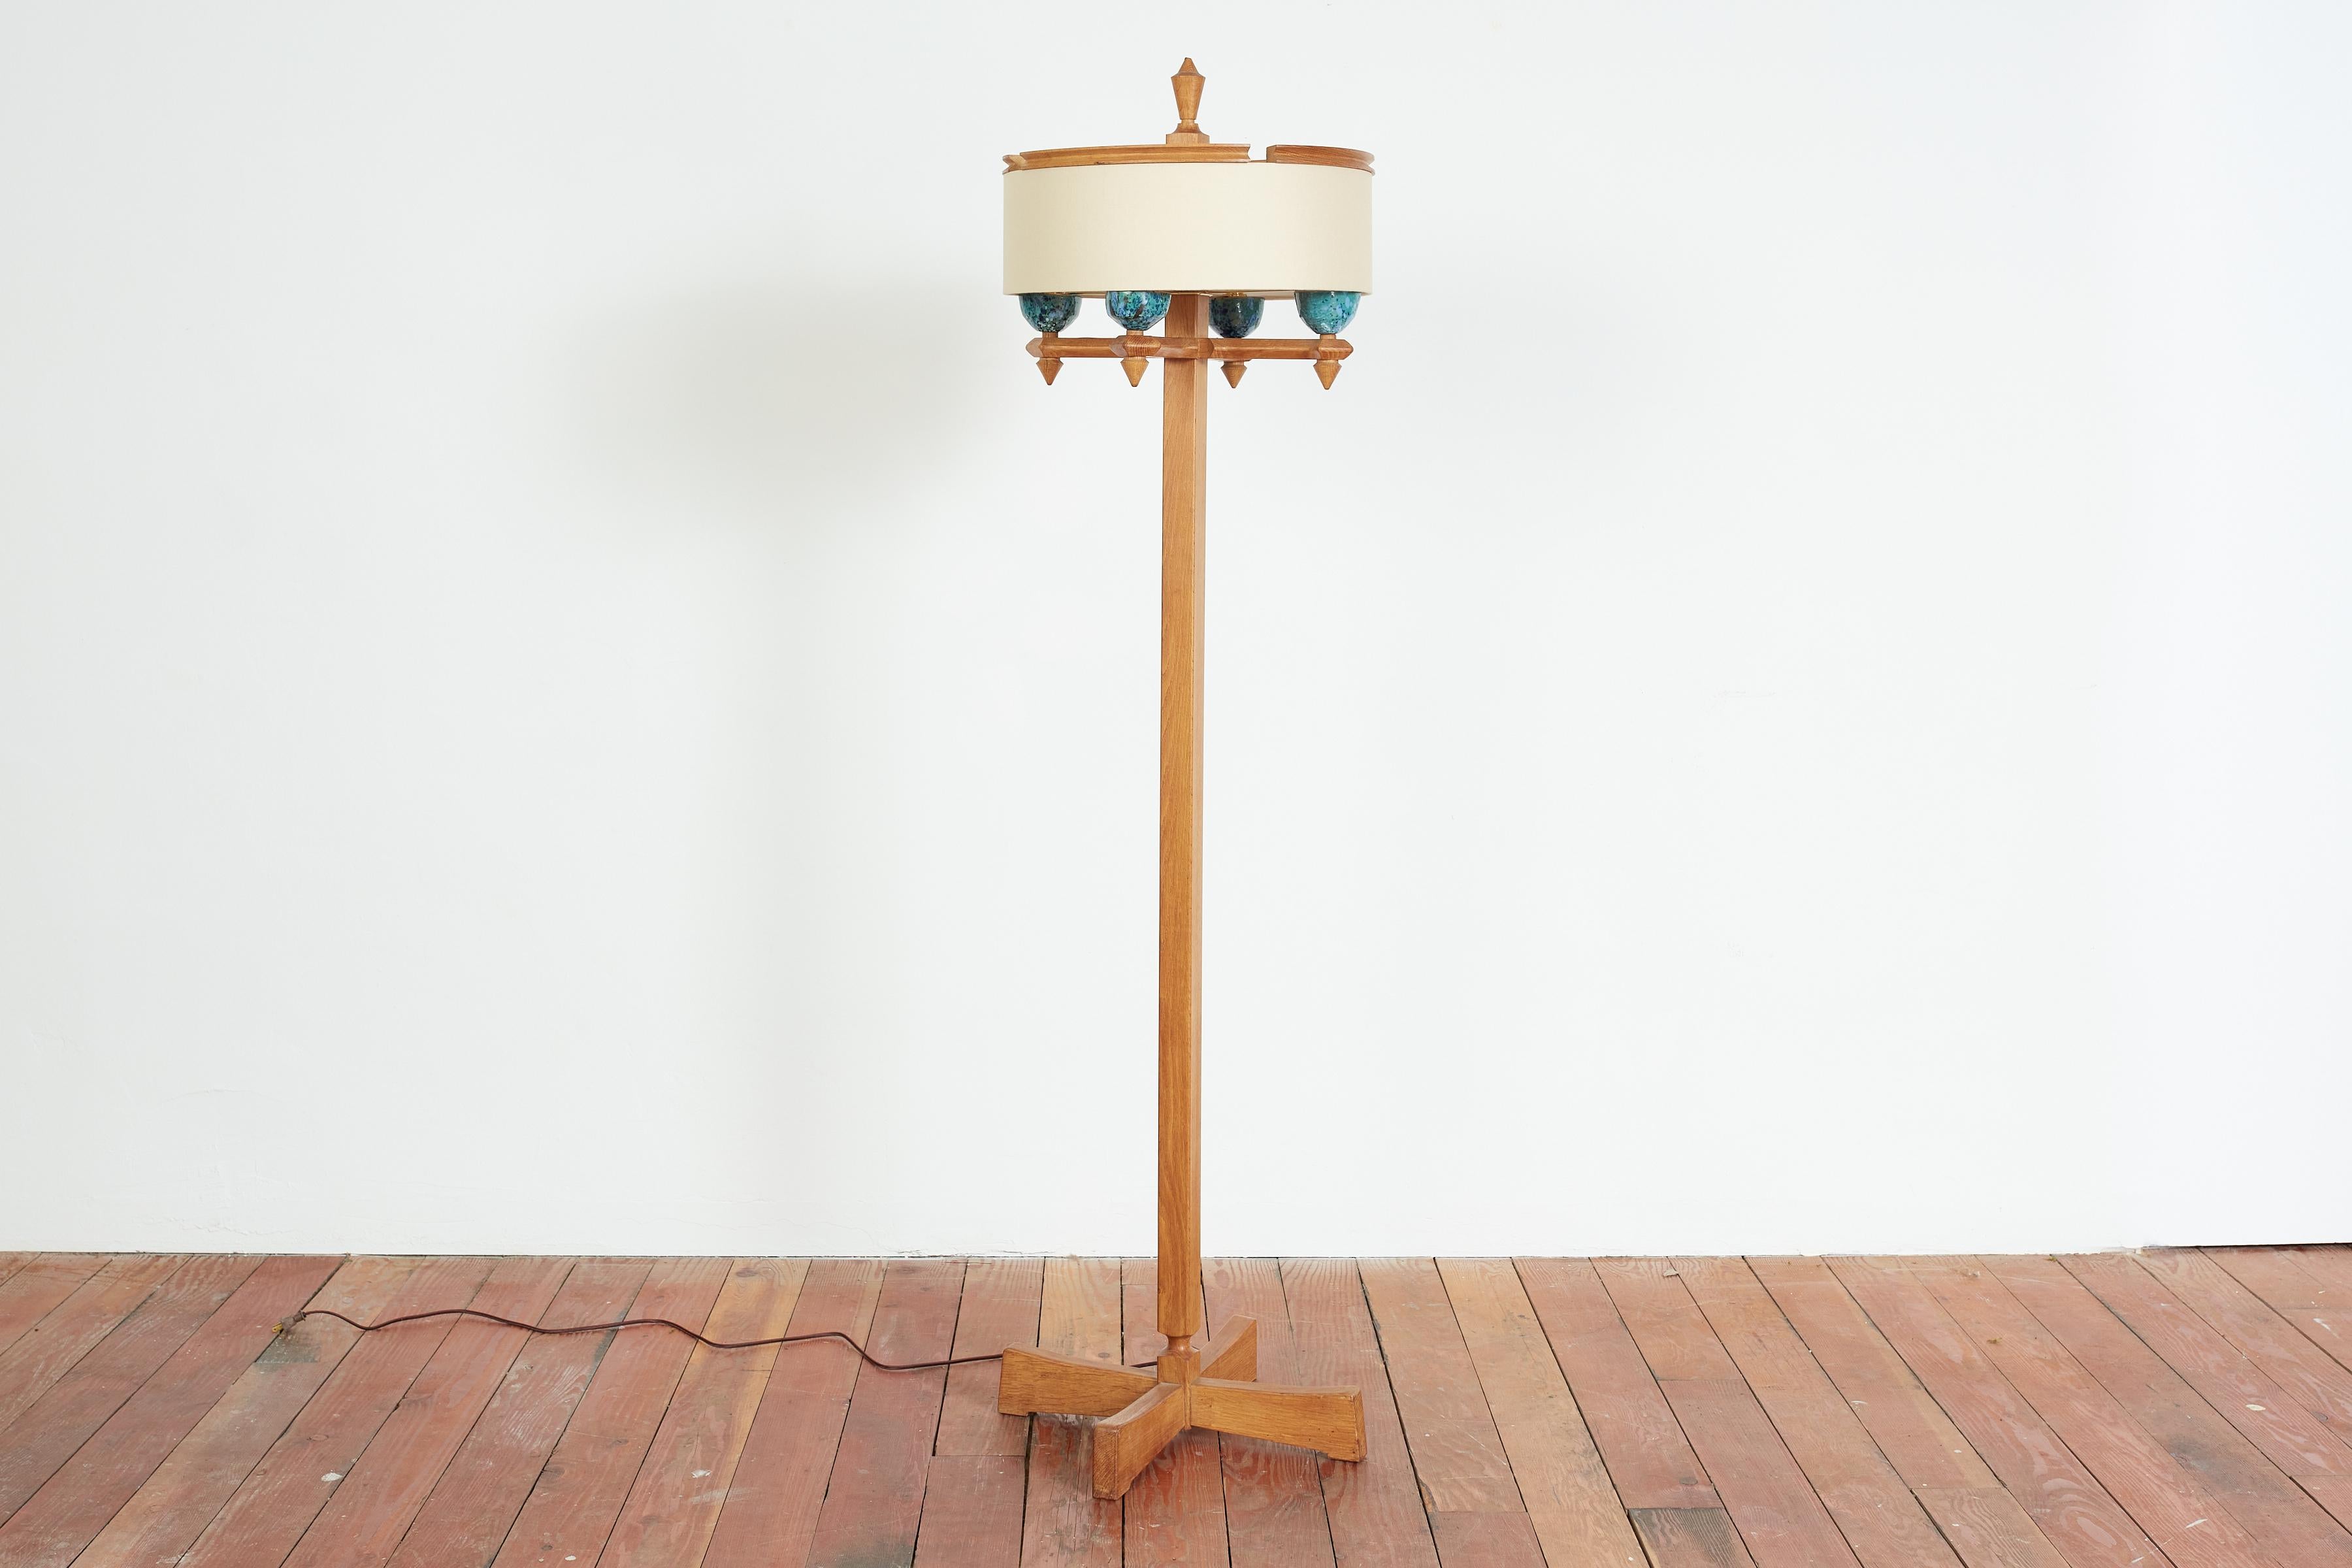 Rare floor lamp by Guillereme et Chambron with tall oak frame and four bright blue signature ceramic sockets. 
New linen shade sits inside the oak rim 
Wonderful piece. 